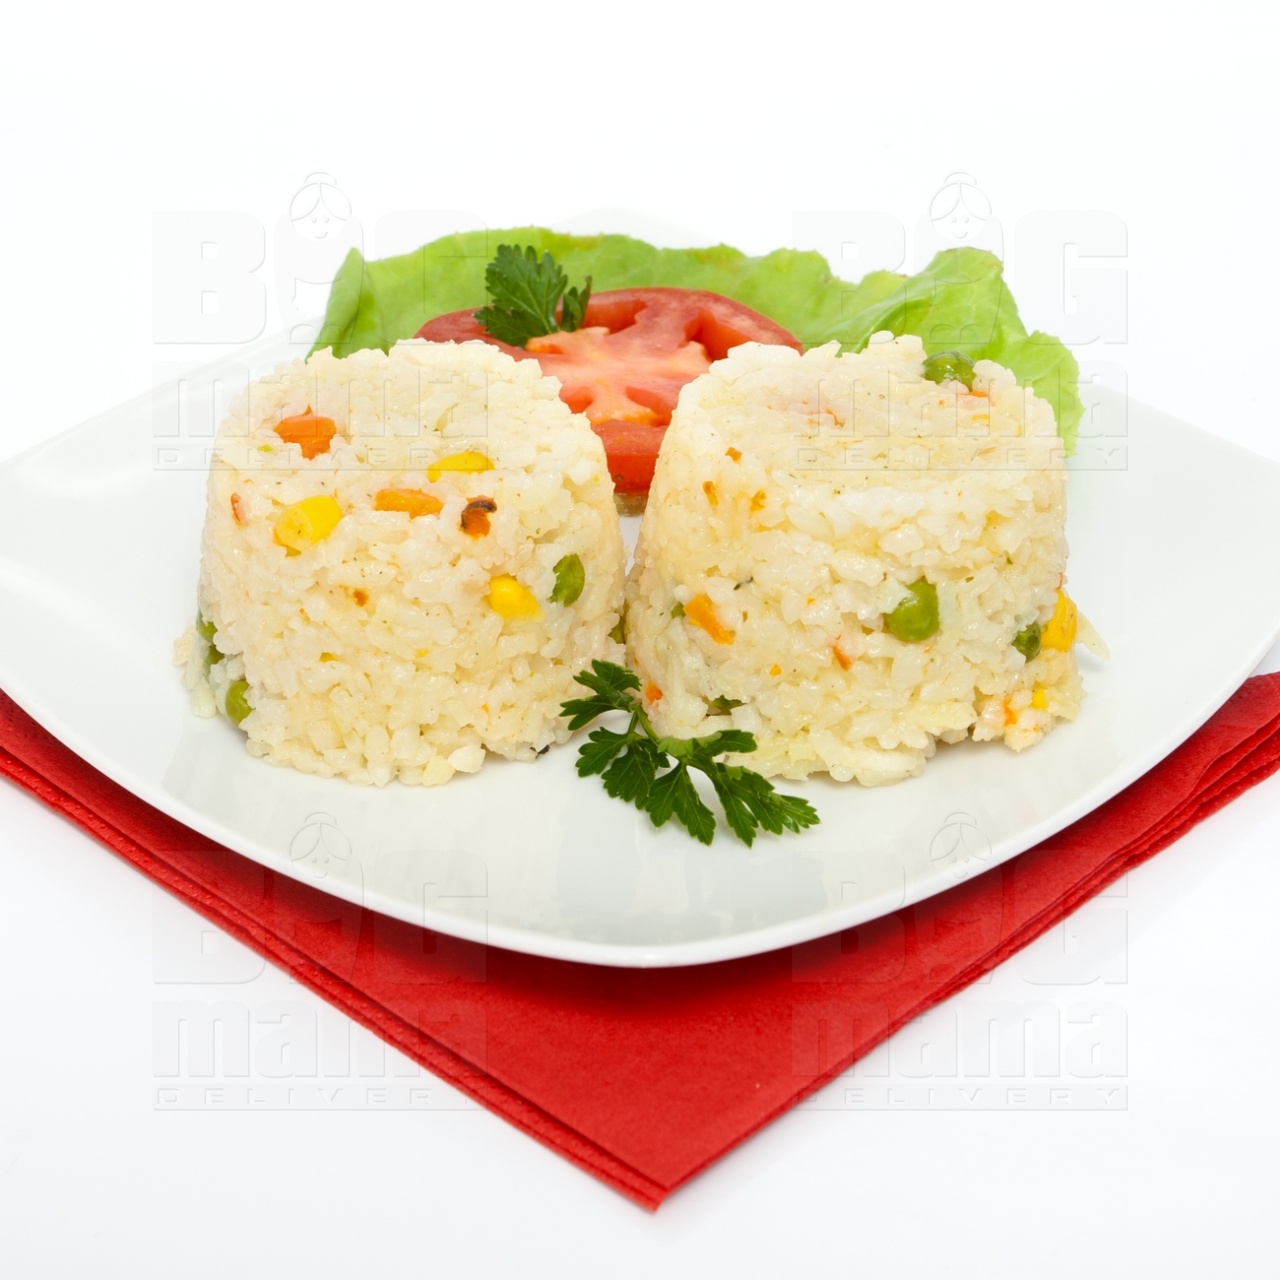 Product #38 image - Rice with vegetables